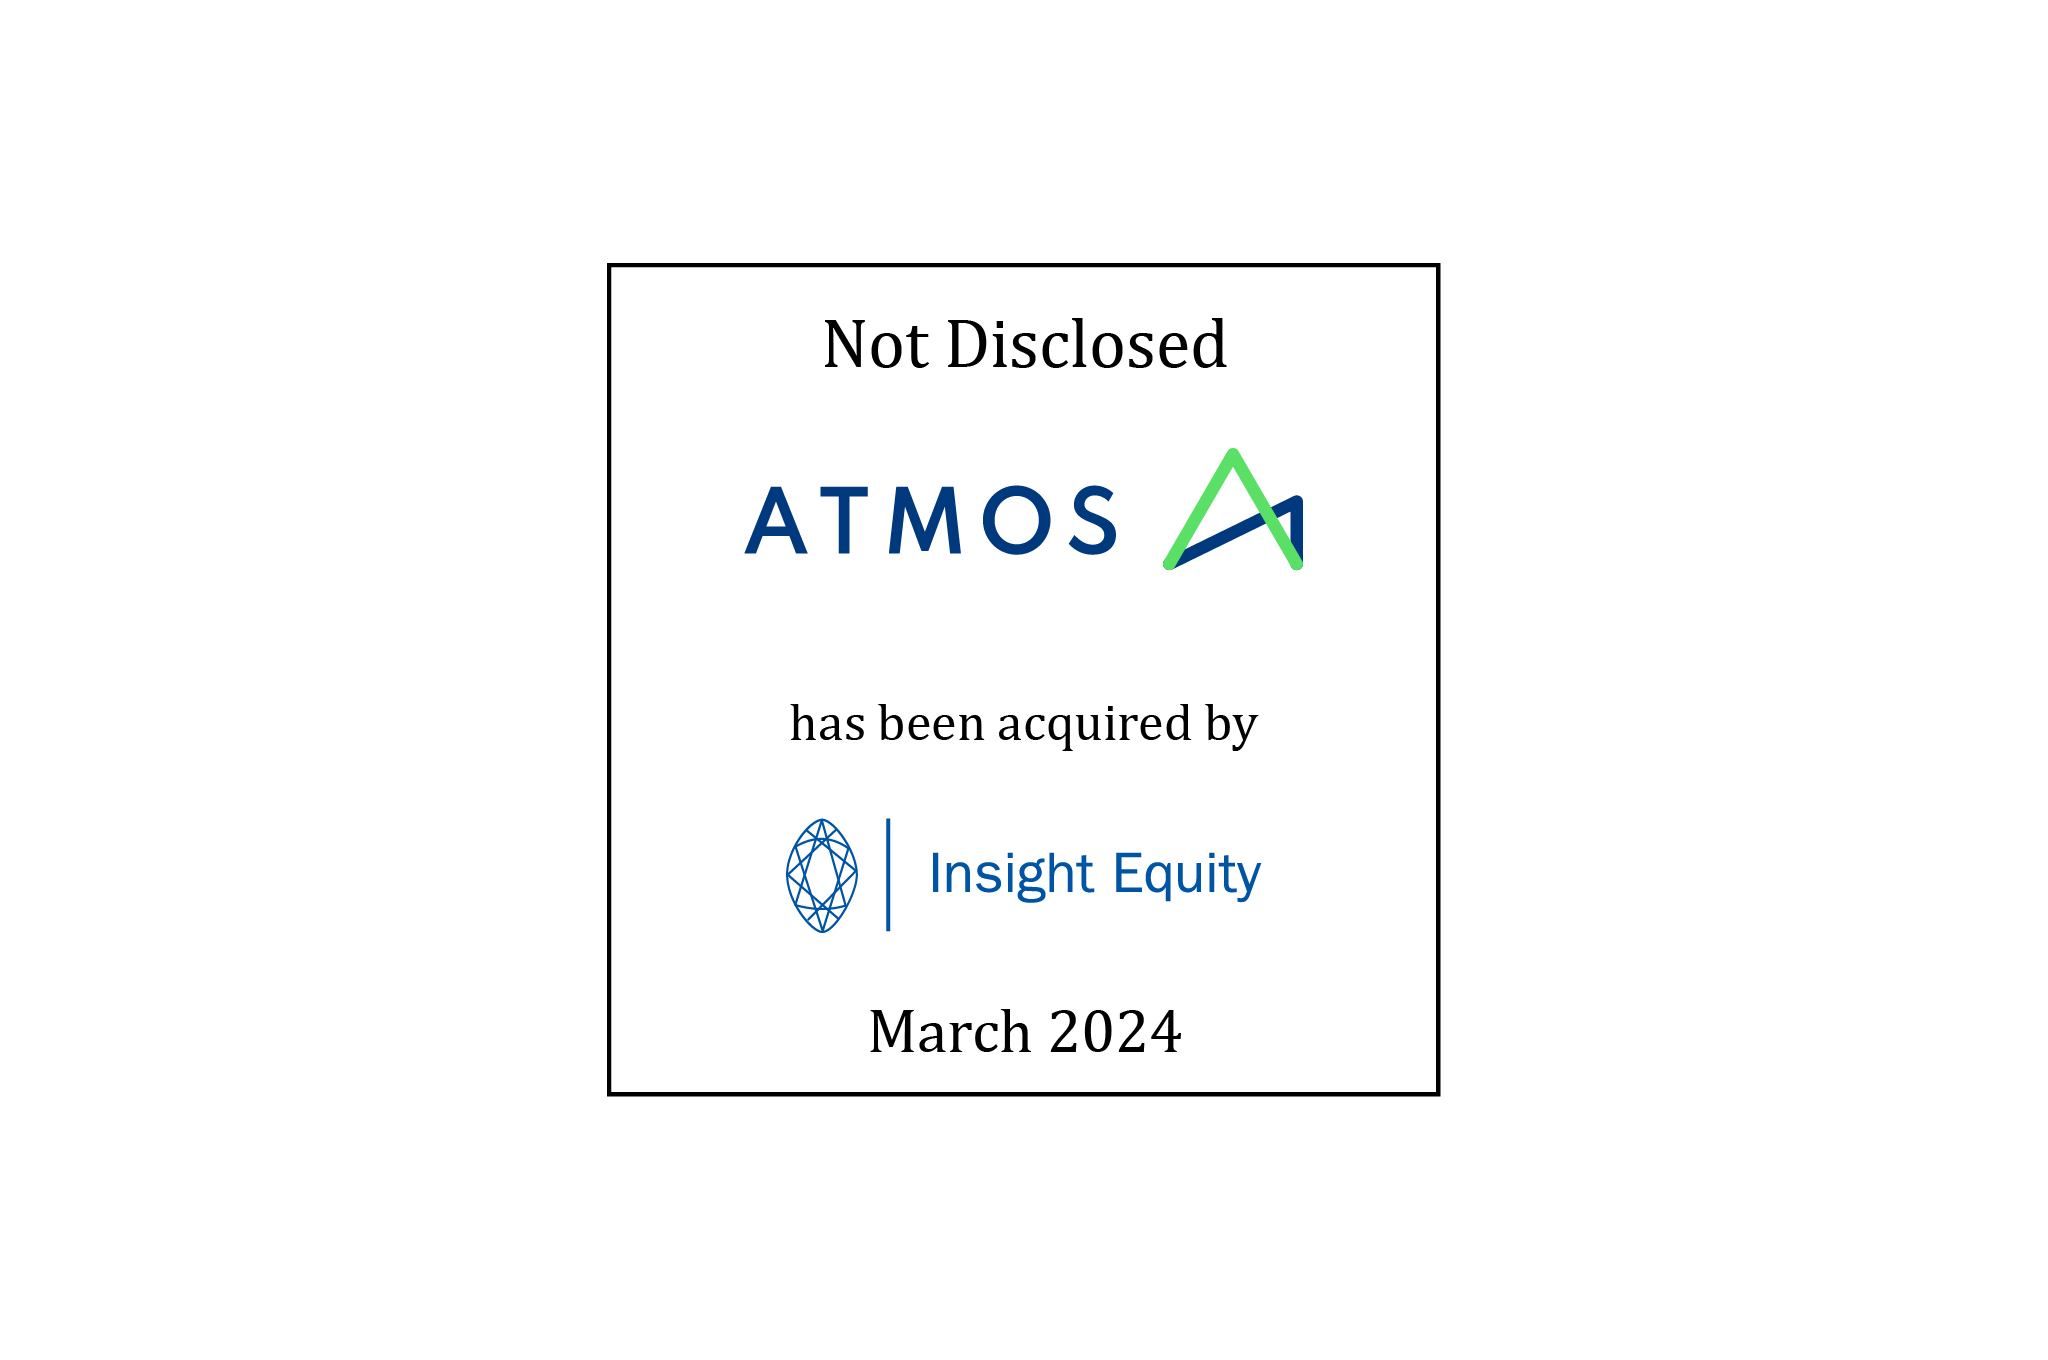 Not Disclosed | Atoms has been acquired by Insight Equity | March 2024